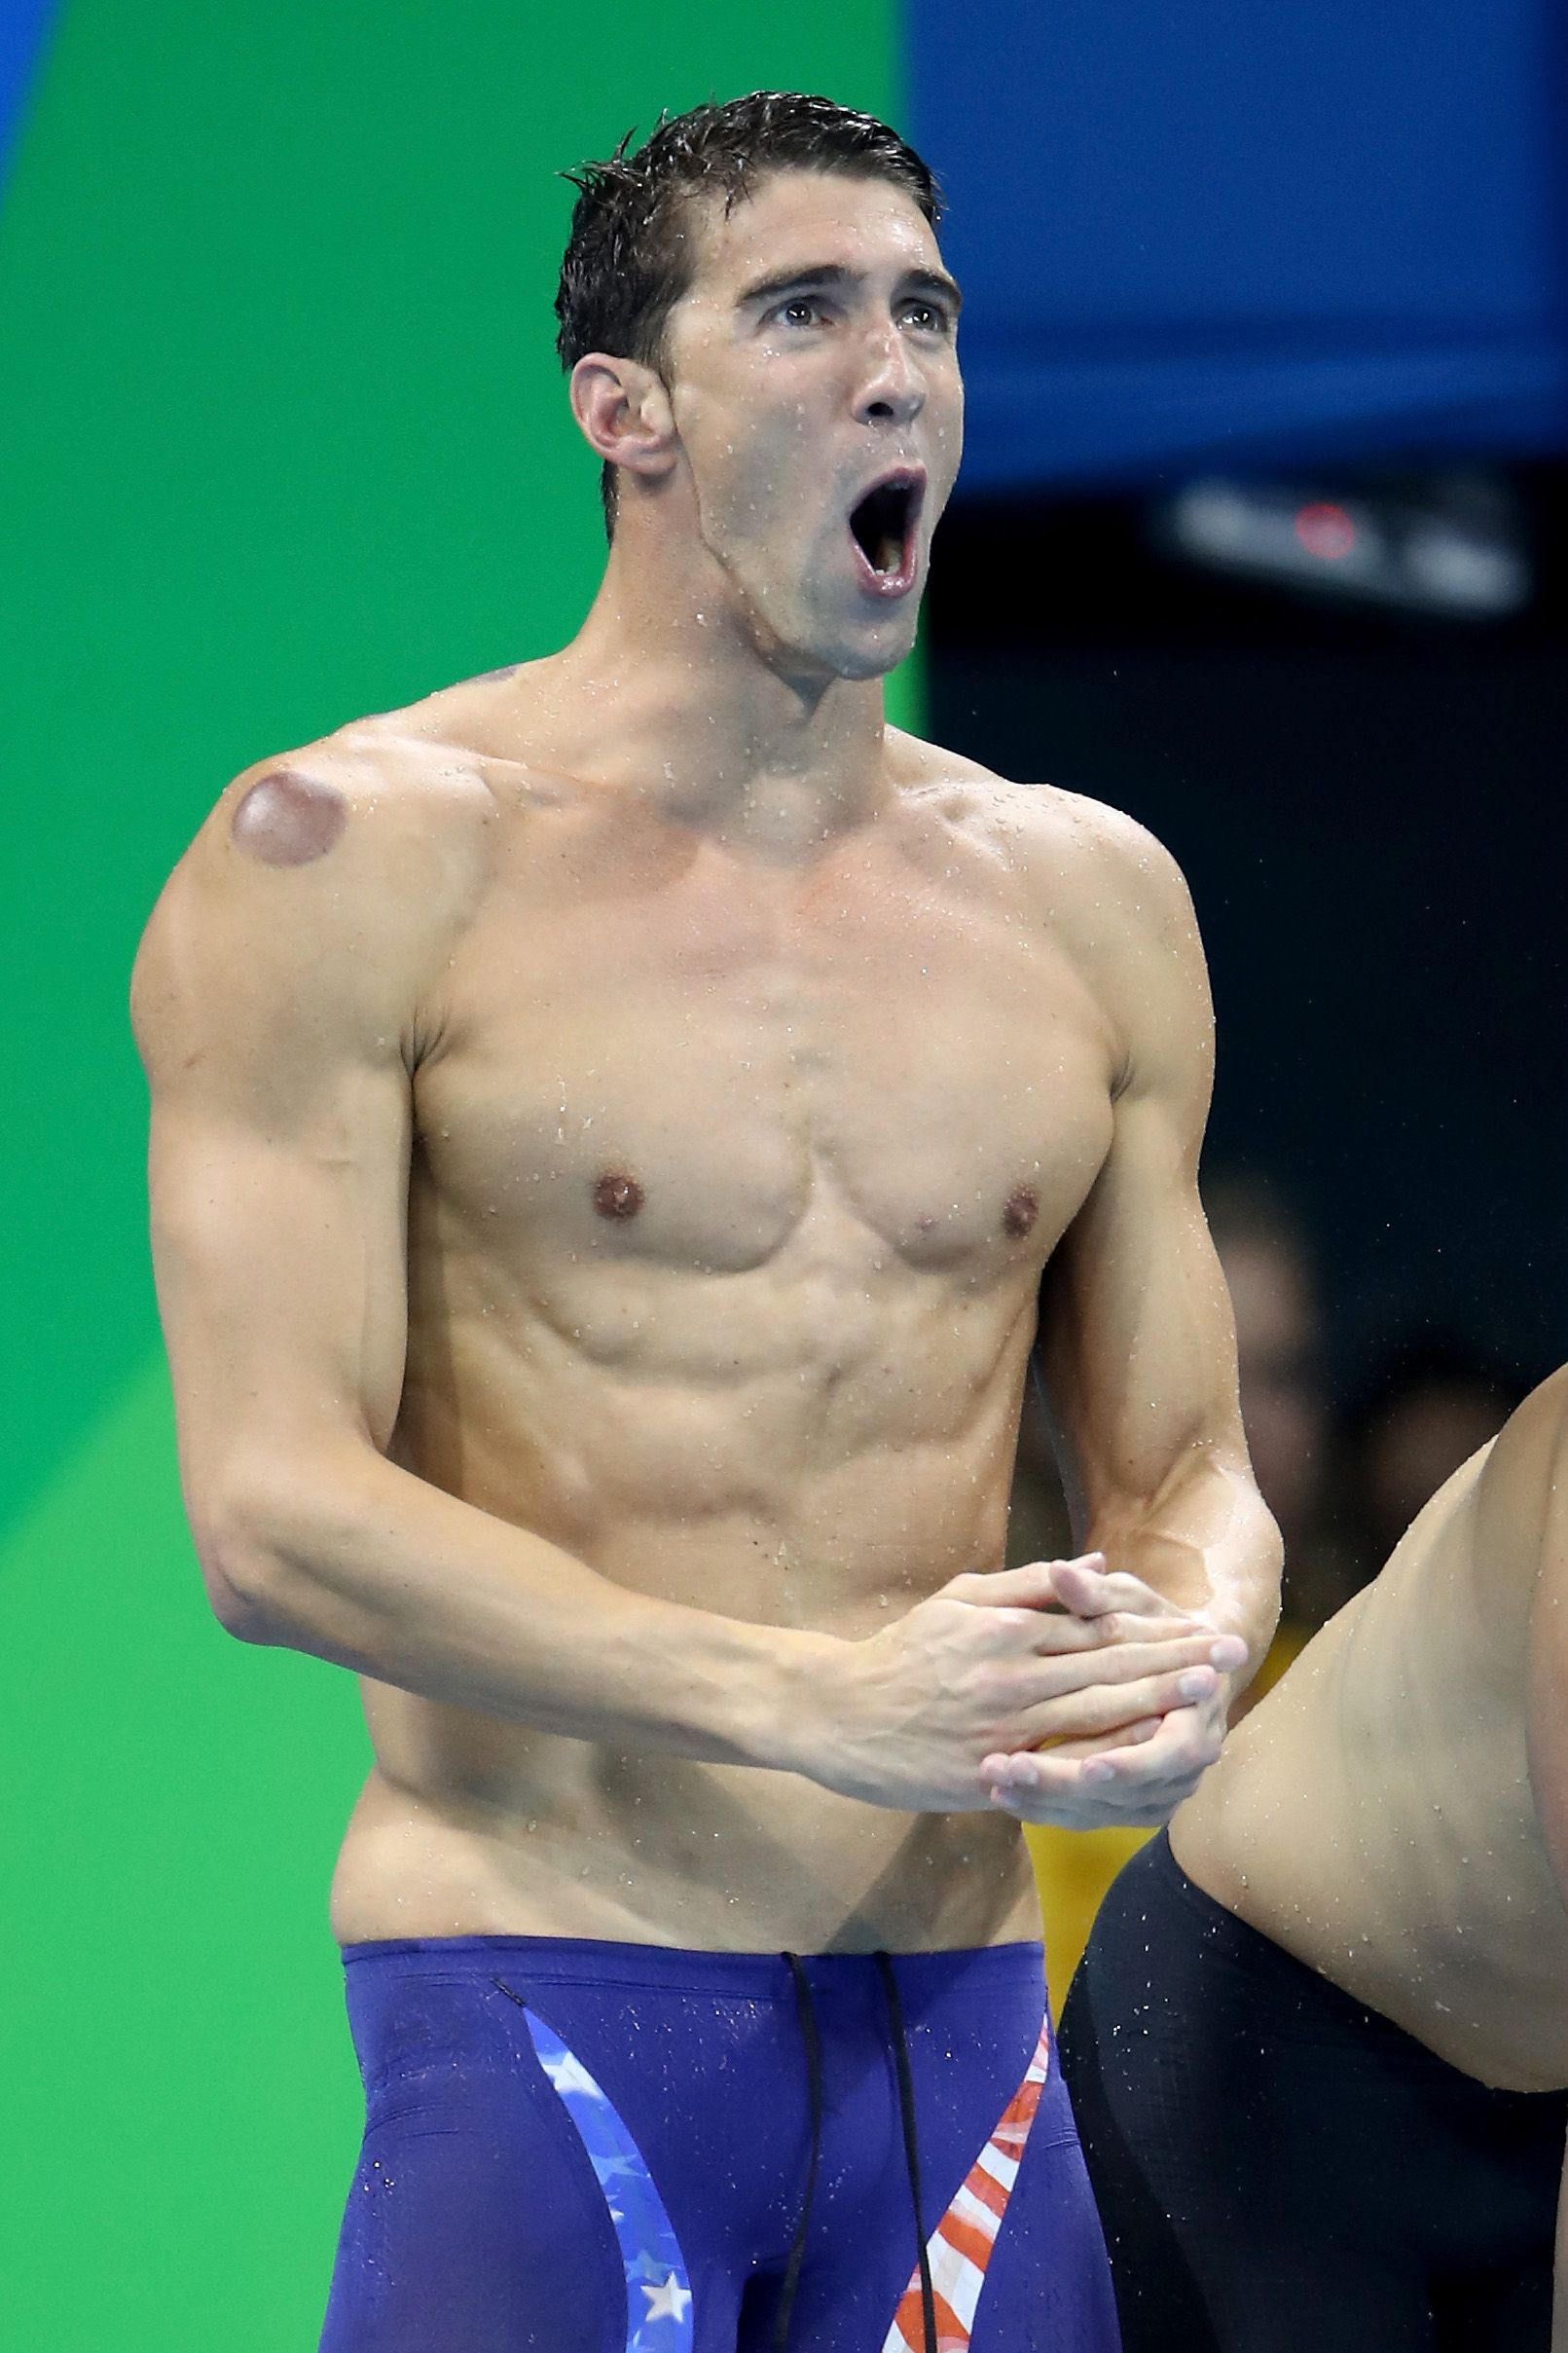 Michael Phelps Has Purple Bruises From Cupping